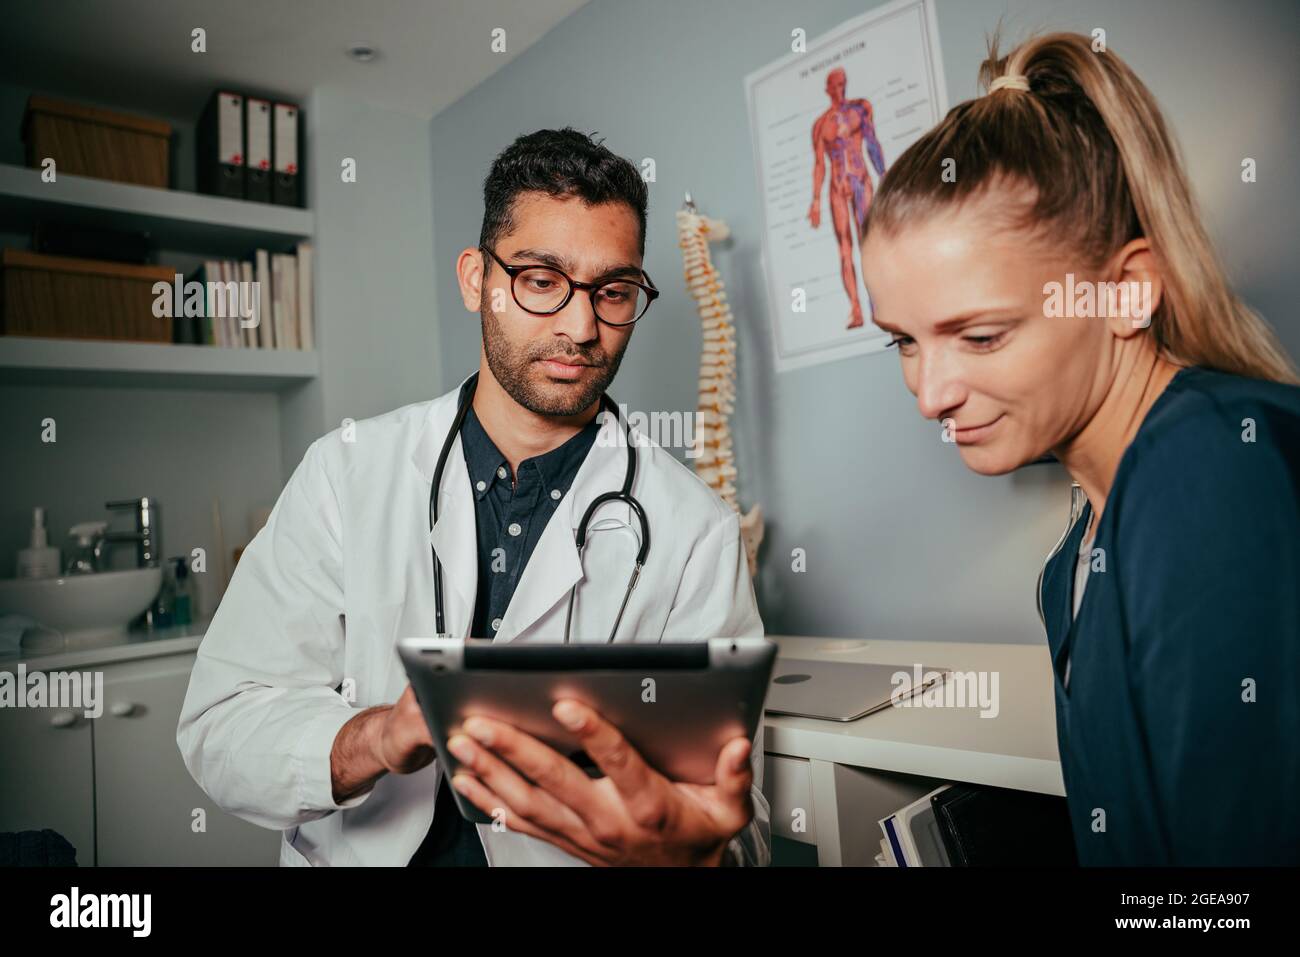 mixed race female nurse sitting with male doctor using digital tablet Stock Photo